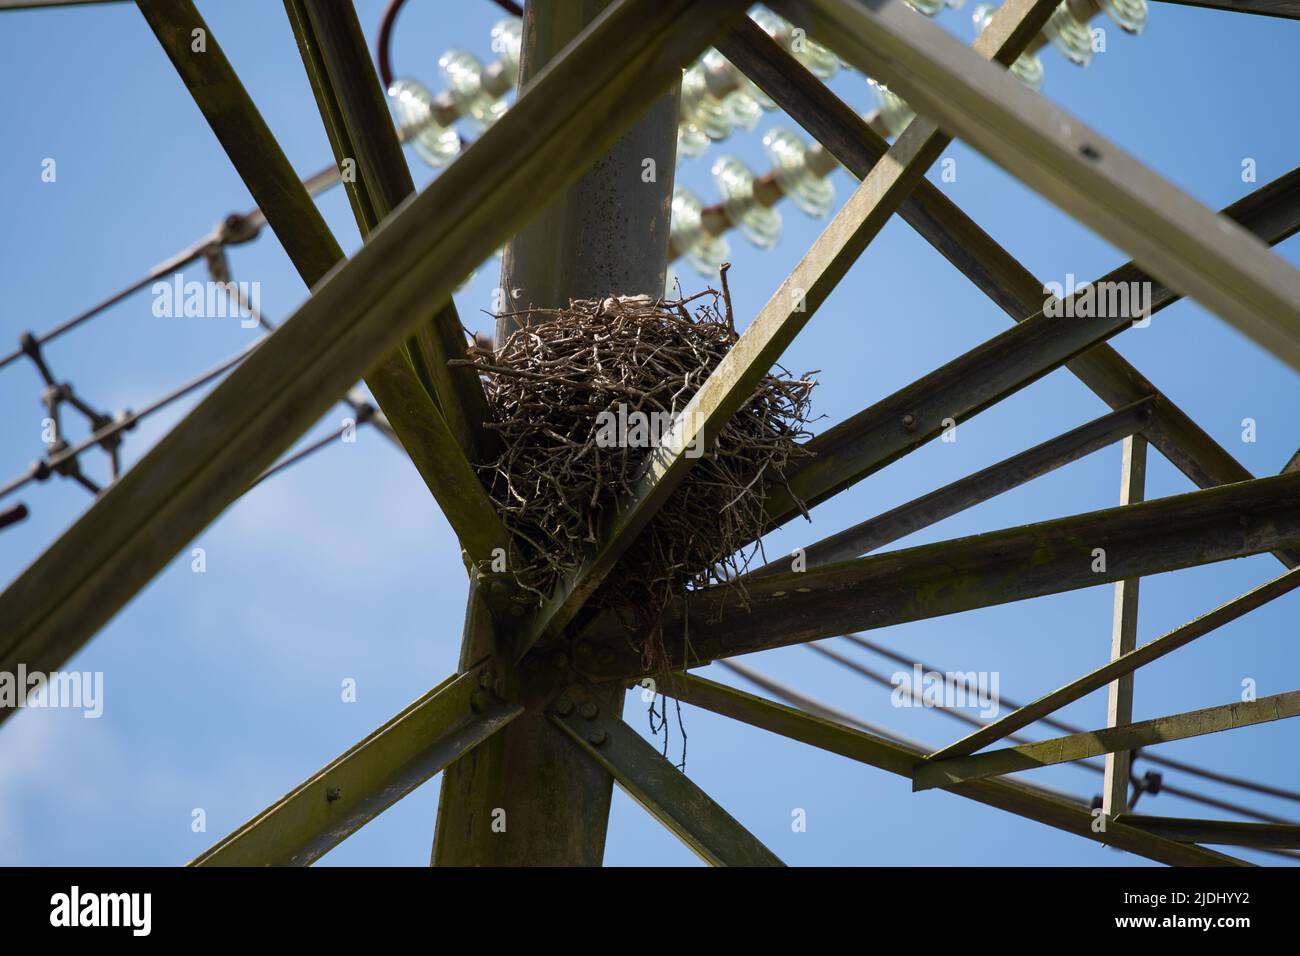 Large bird nest in a lattice electrical power tower in the New Forest Hampshire UK. Stock Photo